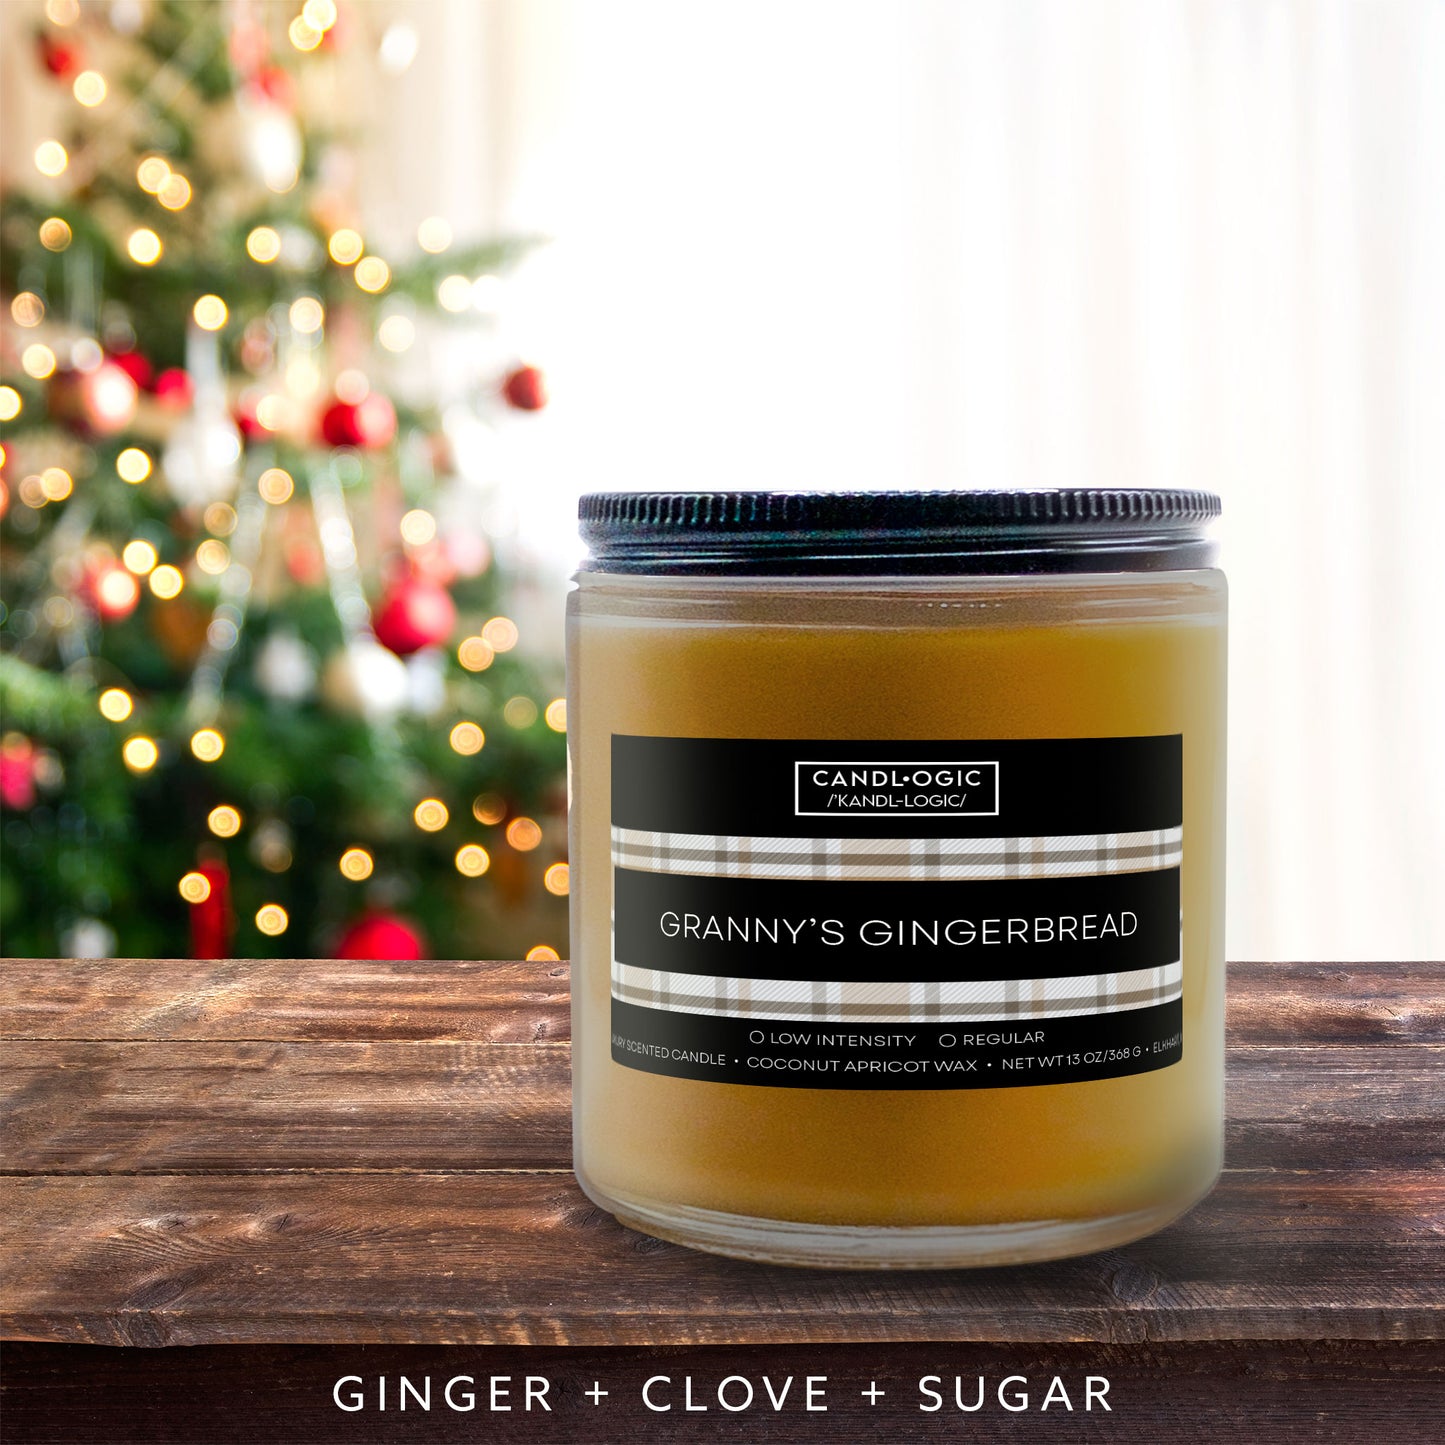 No. 302 Granny's Gingerbread candle - Ginger, Clove & Sugar